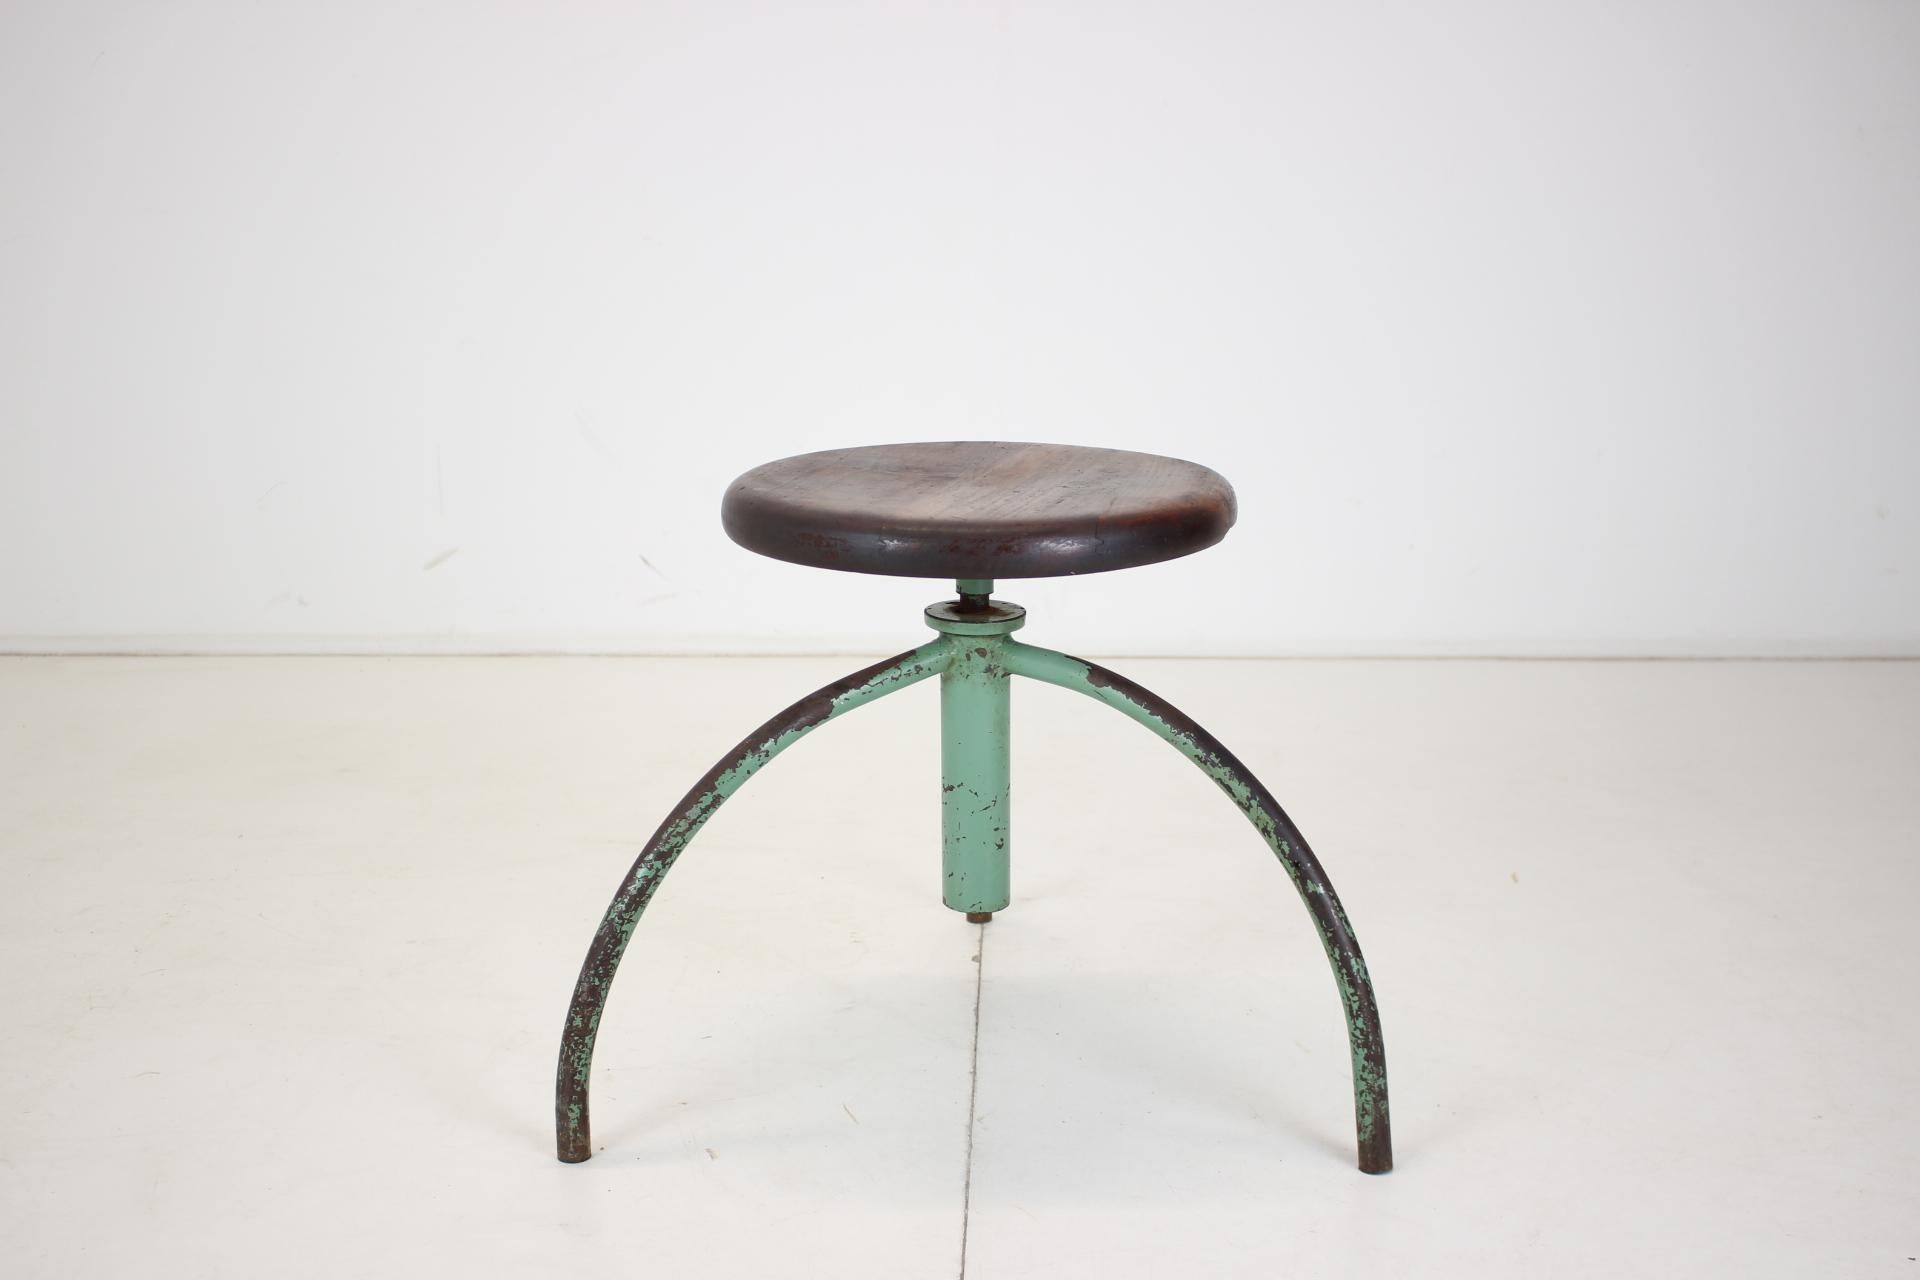 - Made in Czechoslovakia
-Cleaned
-Patina
- Measures: height when stretched 59 cm
-diameter of wooden seat 35cm.